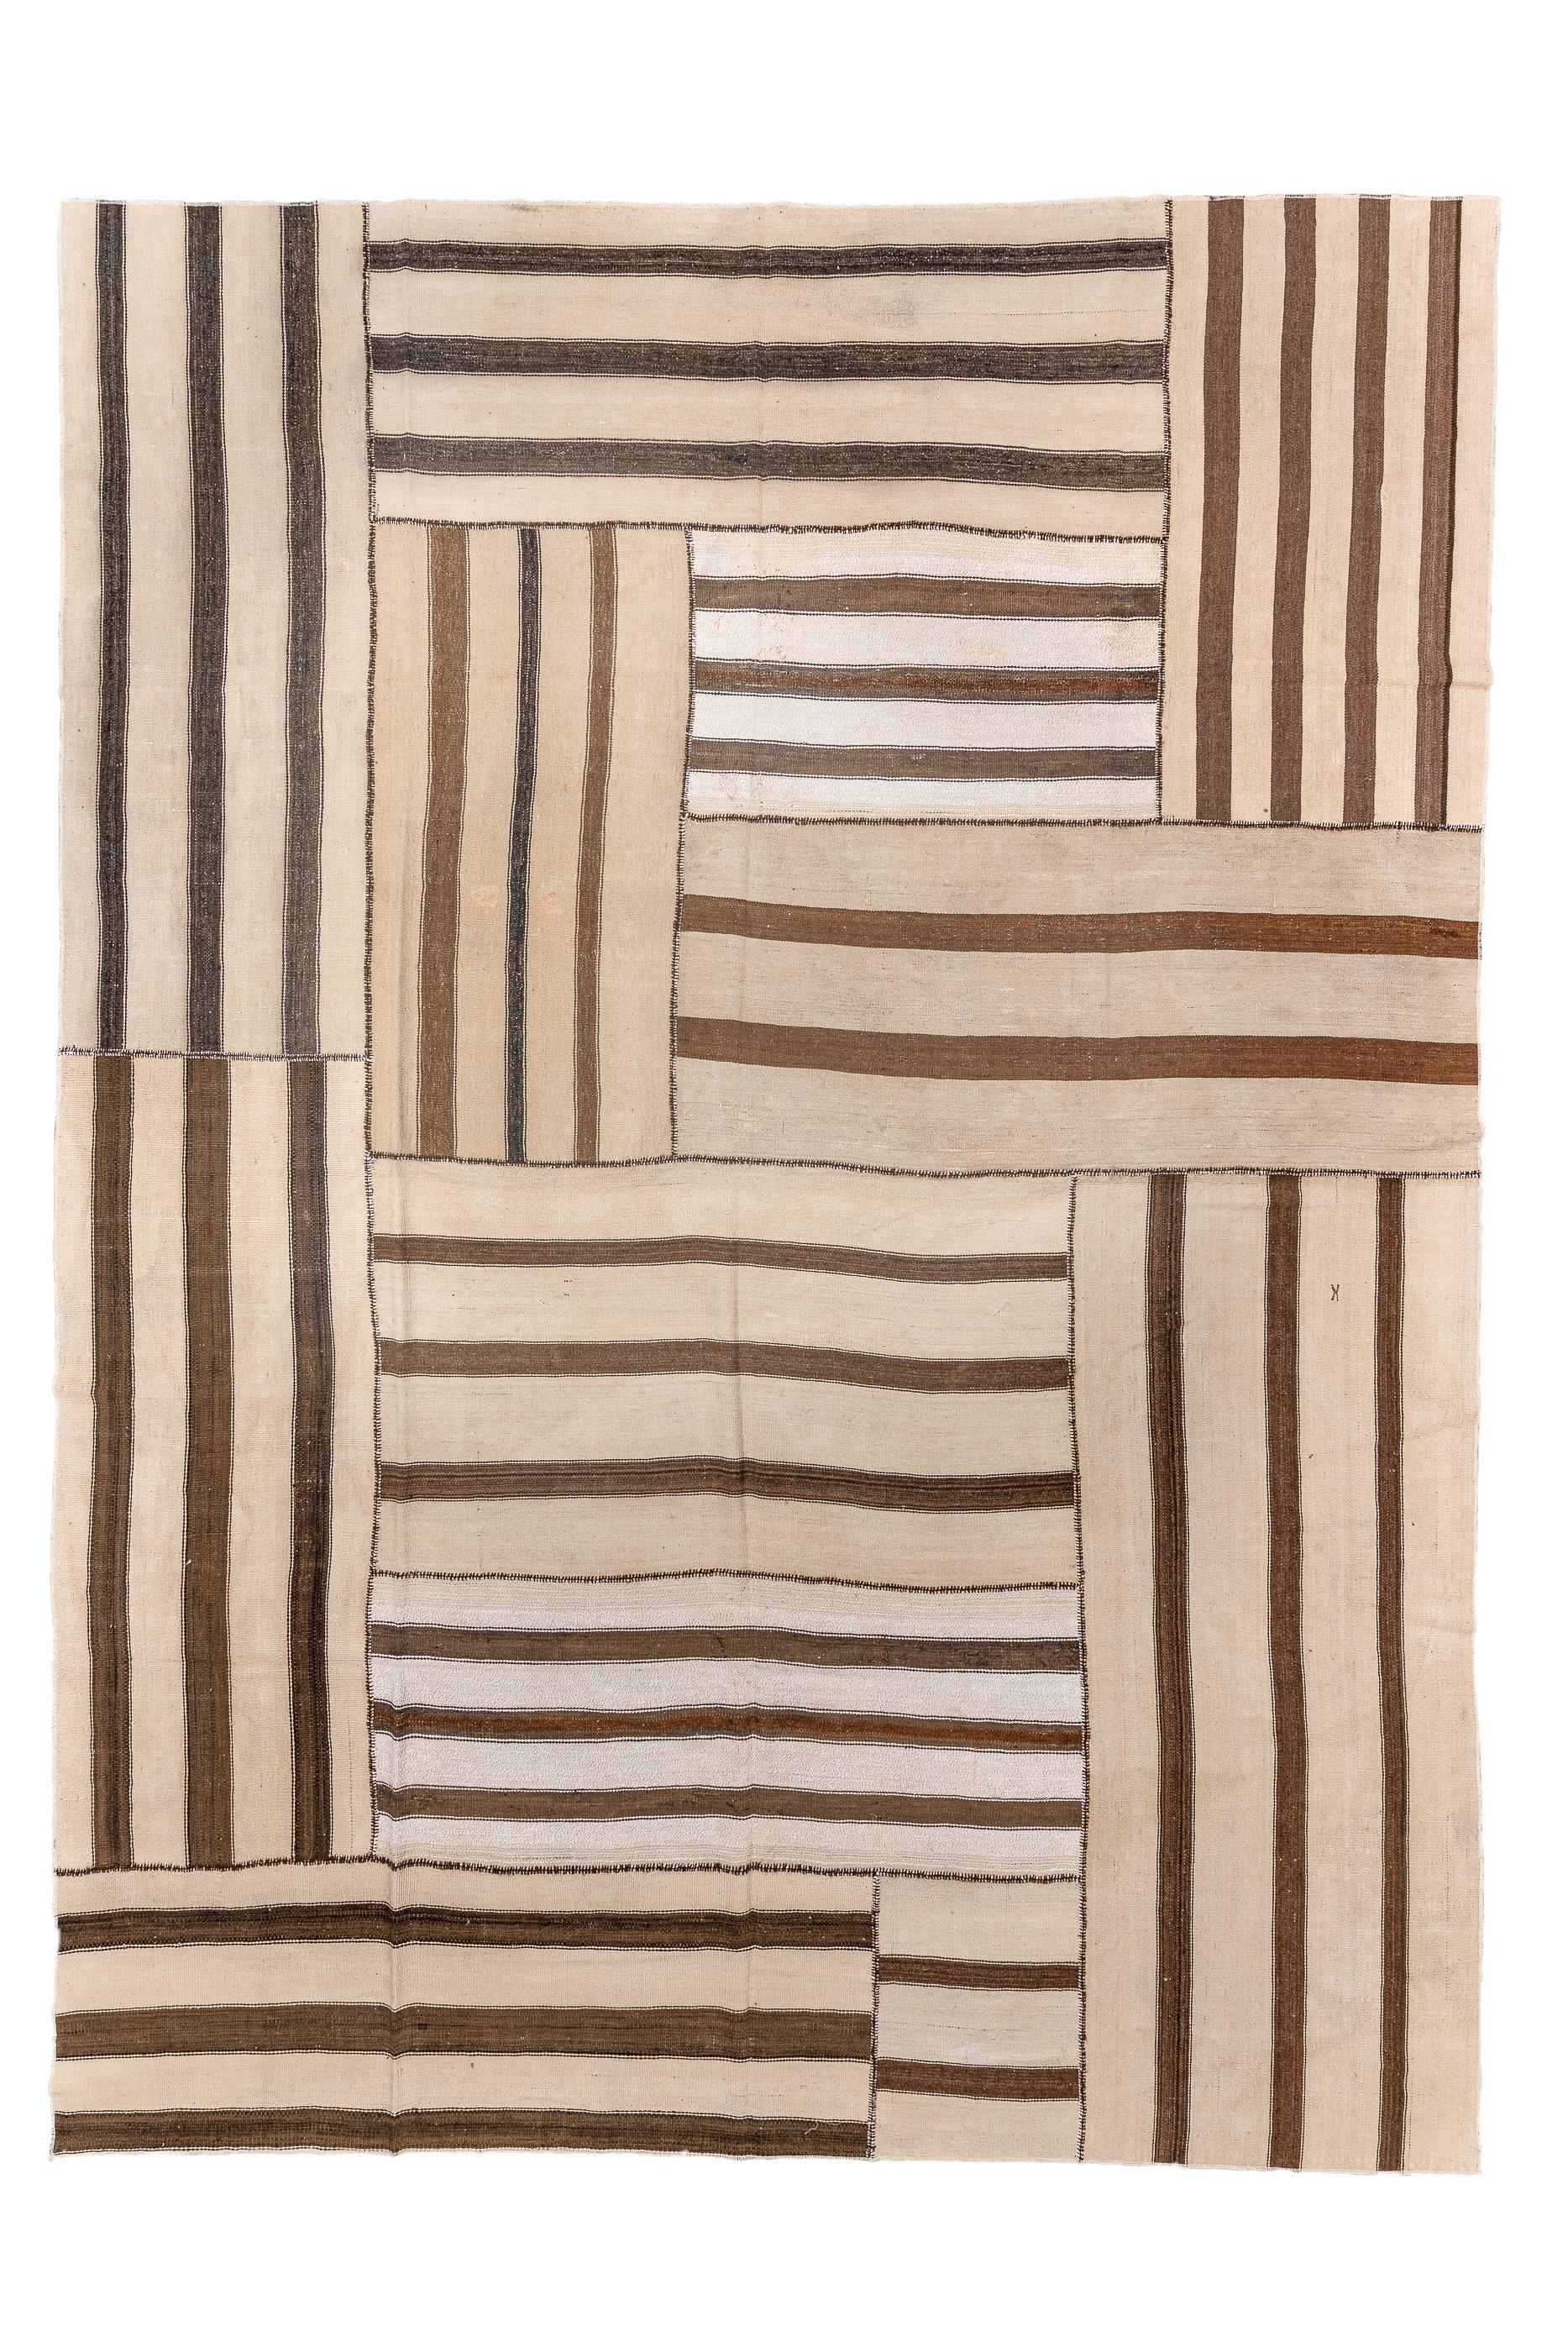 The ecru field is broken up into up and down partial length panels accented in darkest brown stripes. A rectangle is formed by swirling bitonal panels in the upper half. The panels have two to four dark brown stripes each. The dimensions are